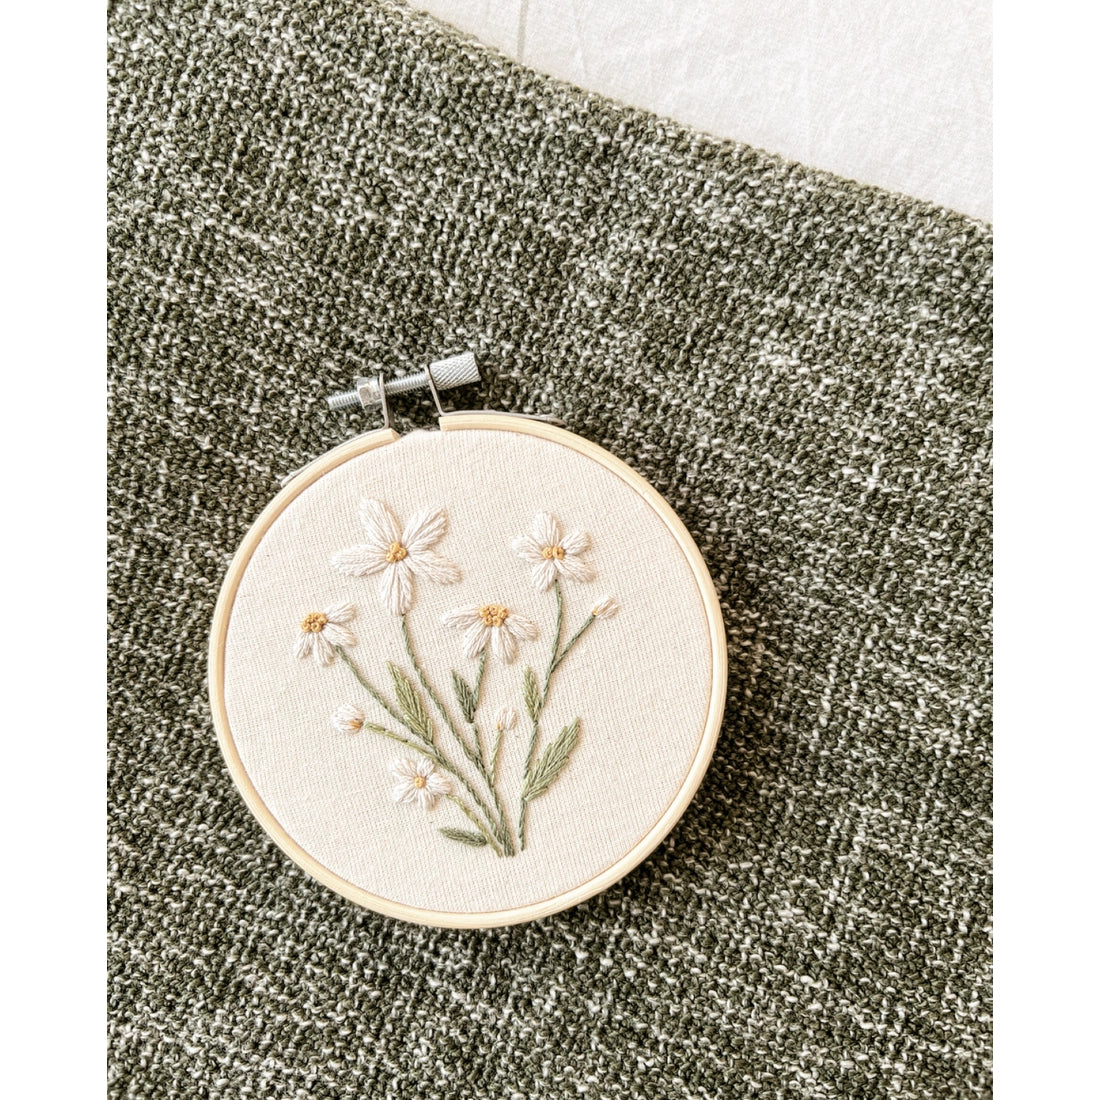 Wild Daisy Embroidery Kit - Mindful Mantra Embroidery